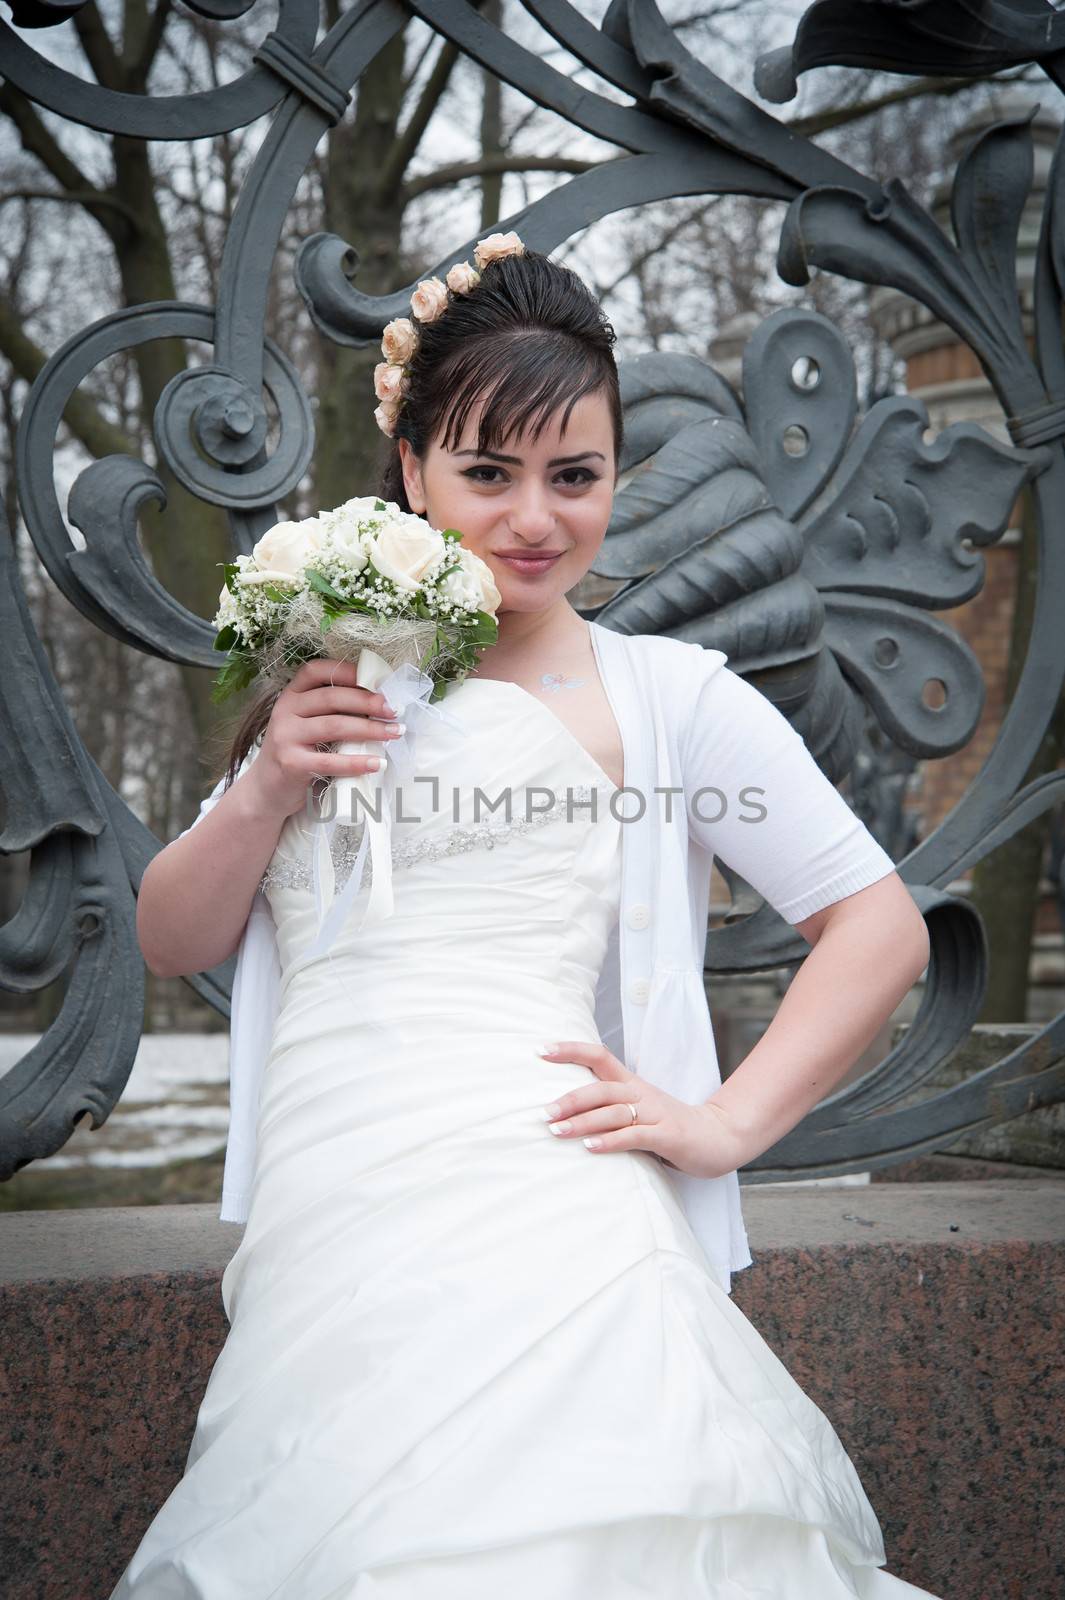 bride with bouquet in park fence by raduga21